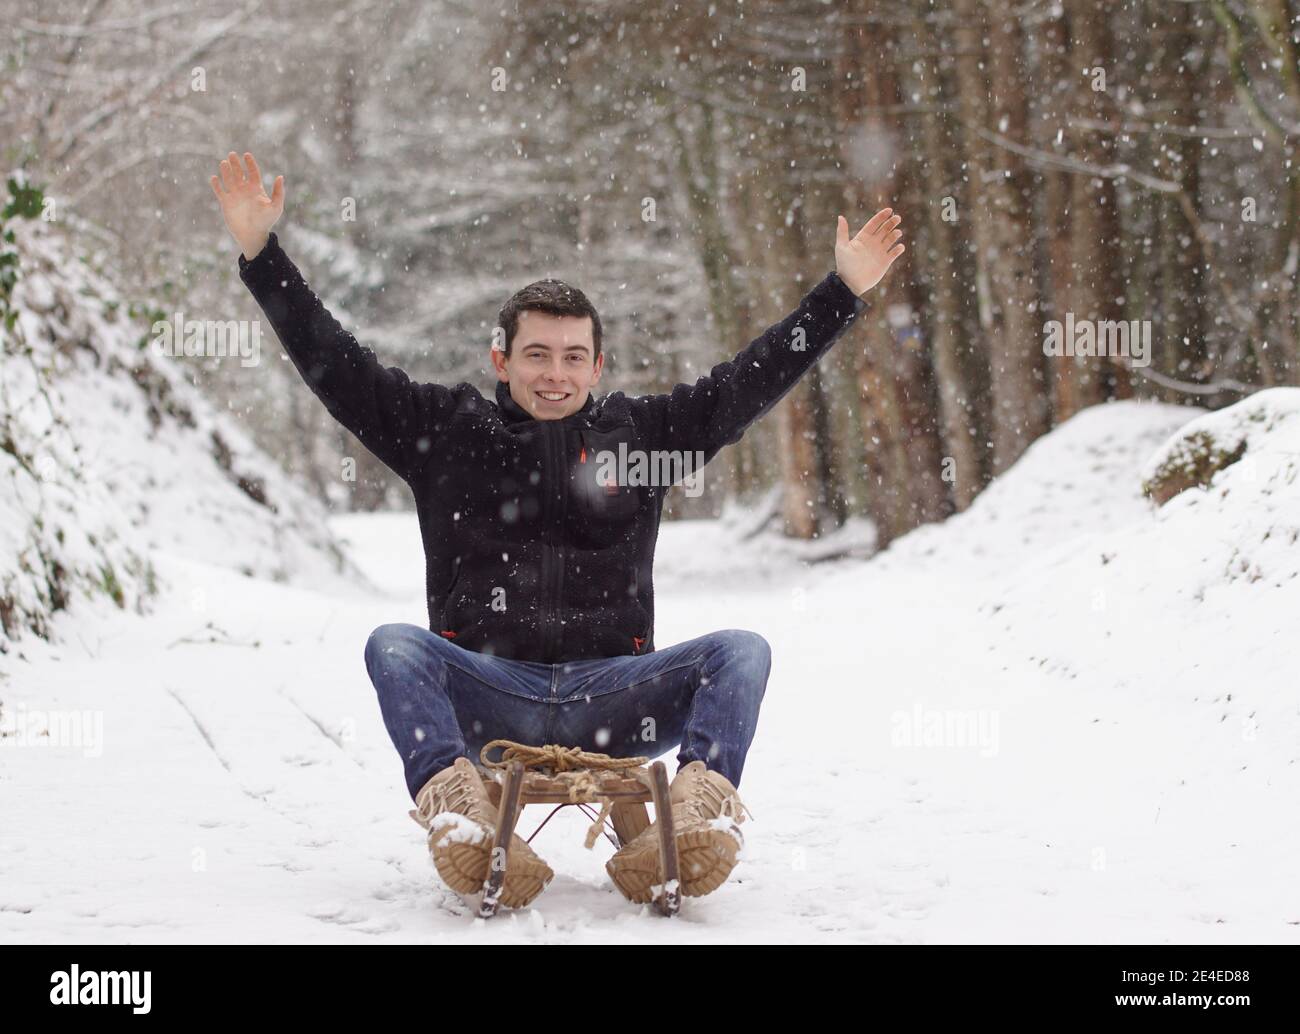 Winter time - Man riding a sledge putting the hands up and smiling Stock Photo